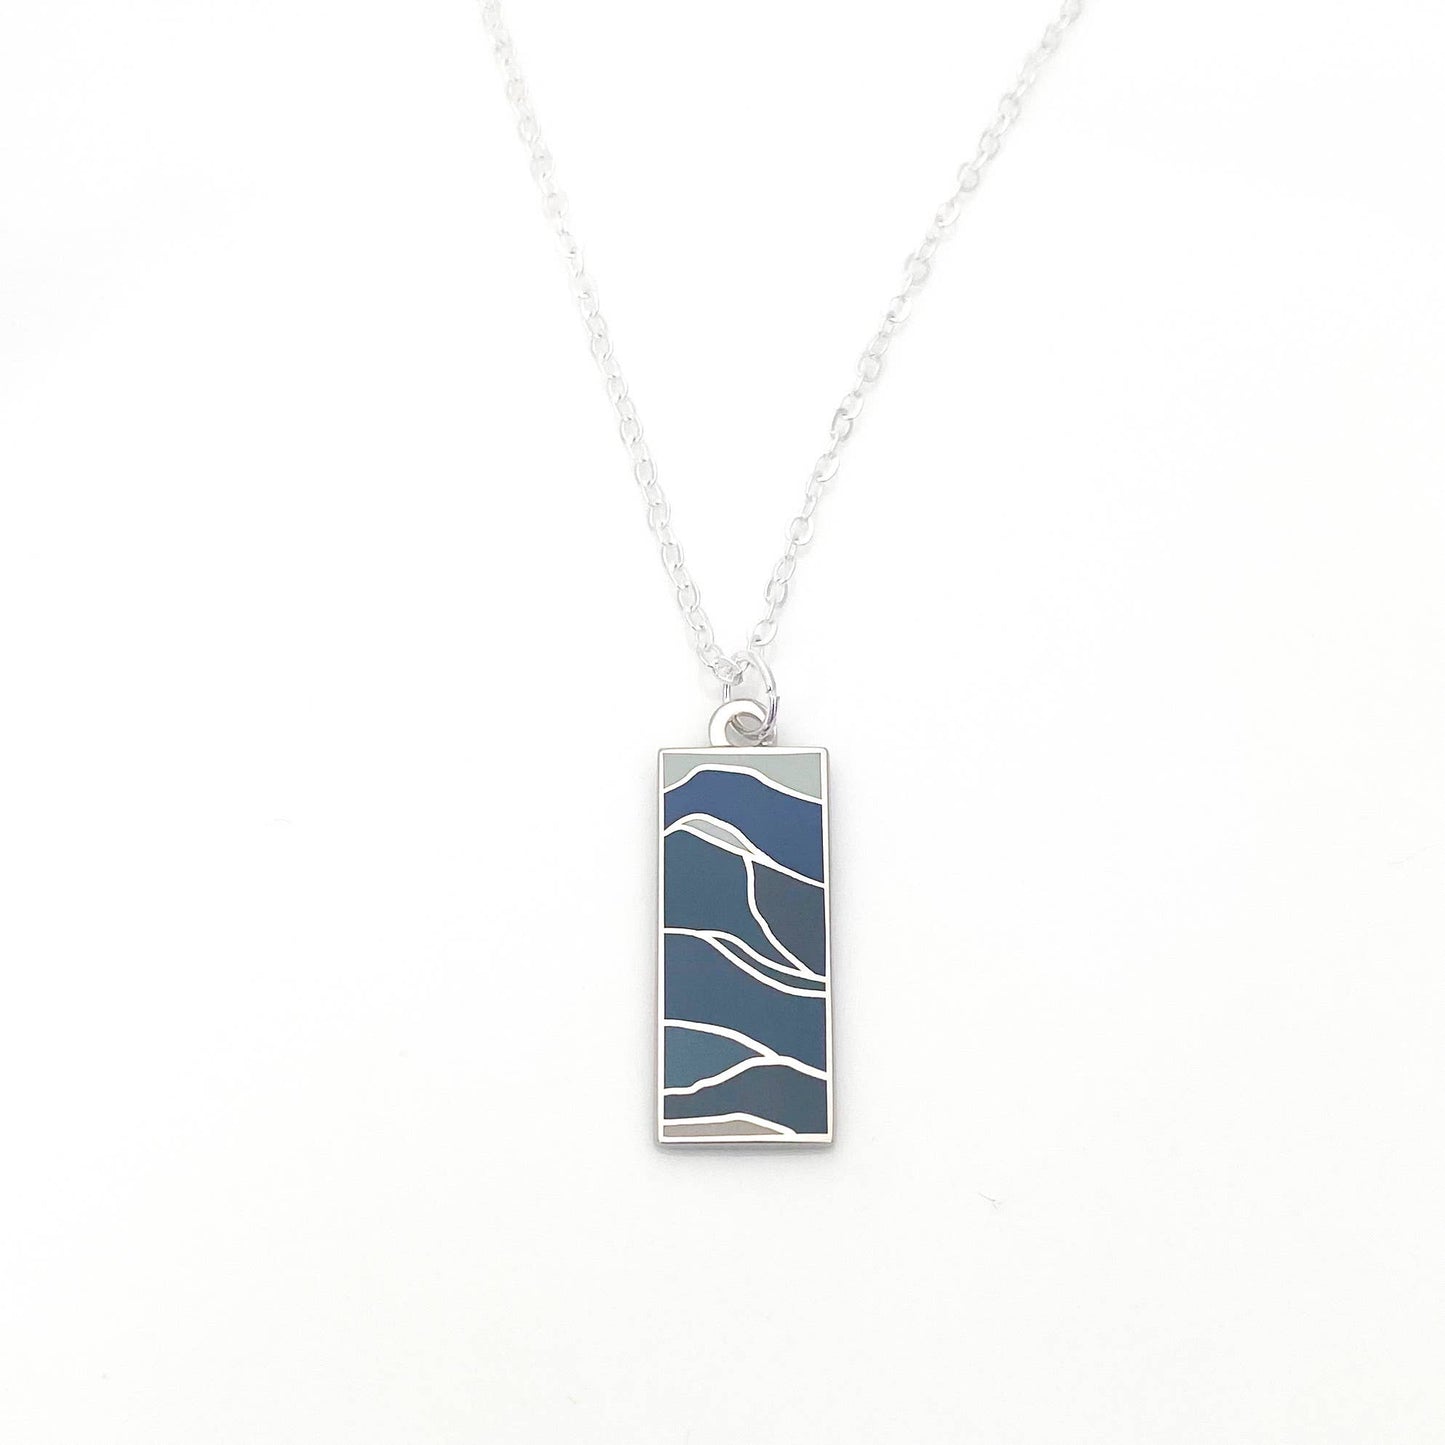 Square necklace with a waves of blue enamel